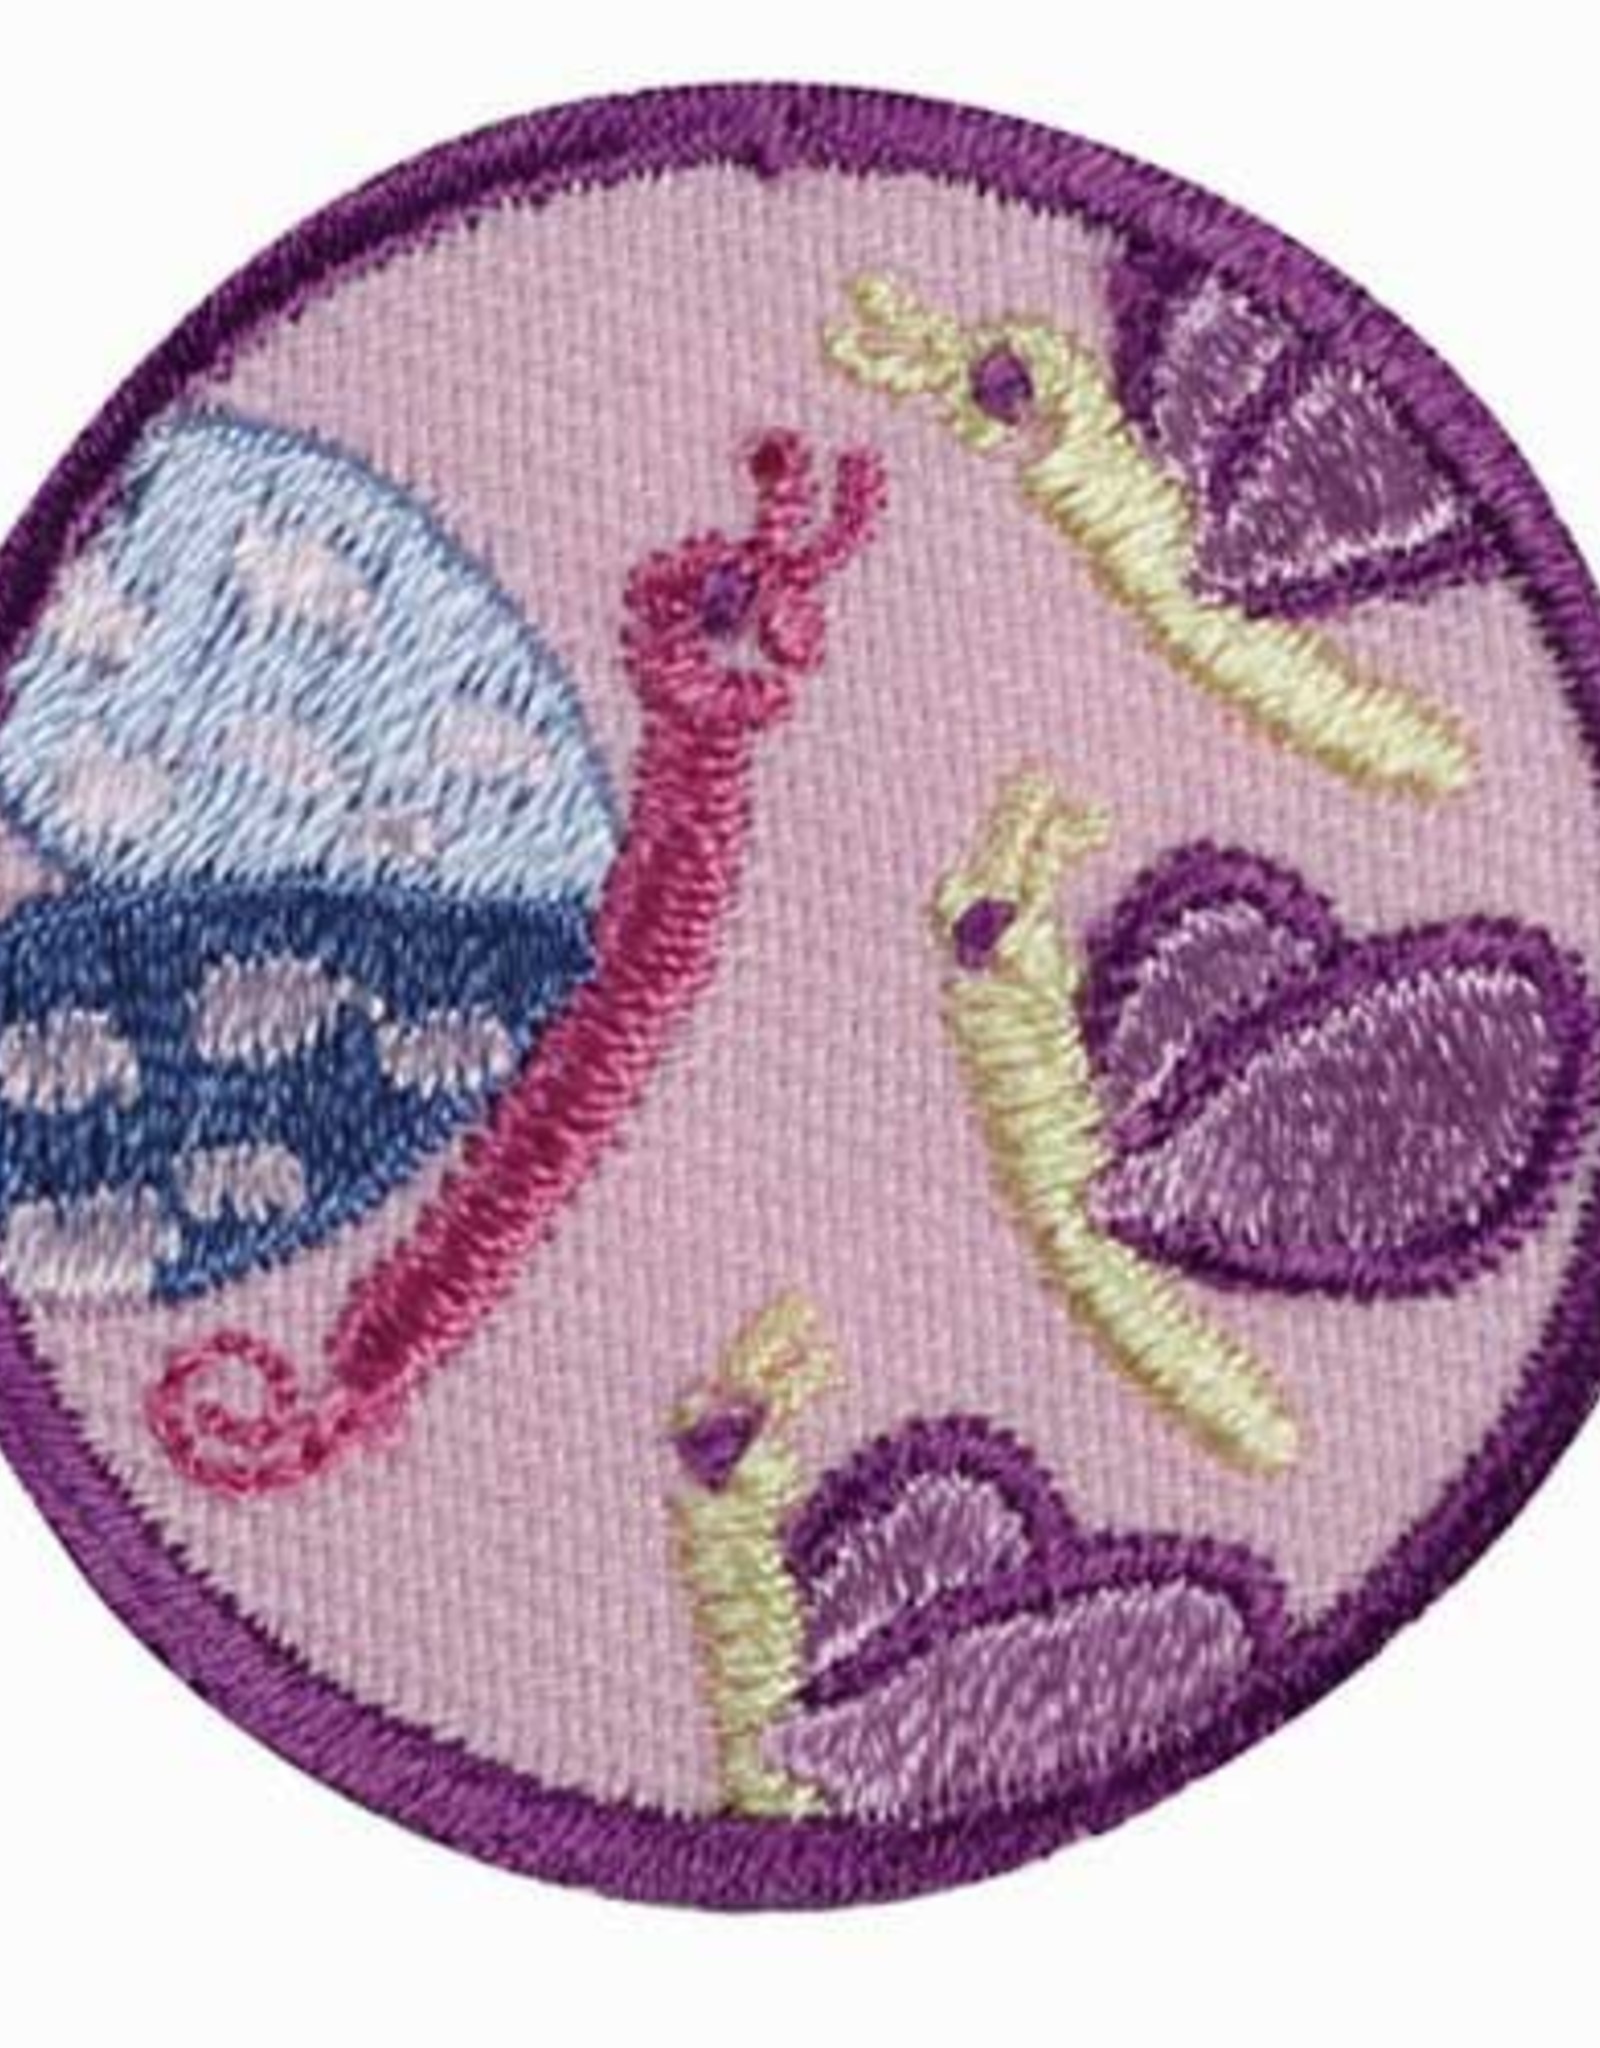 GIRL SCOUTS OF THE USA Junior Social Butterfly Badge